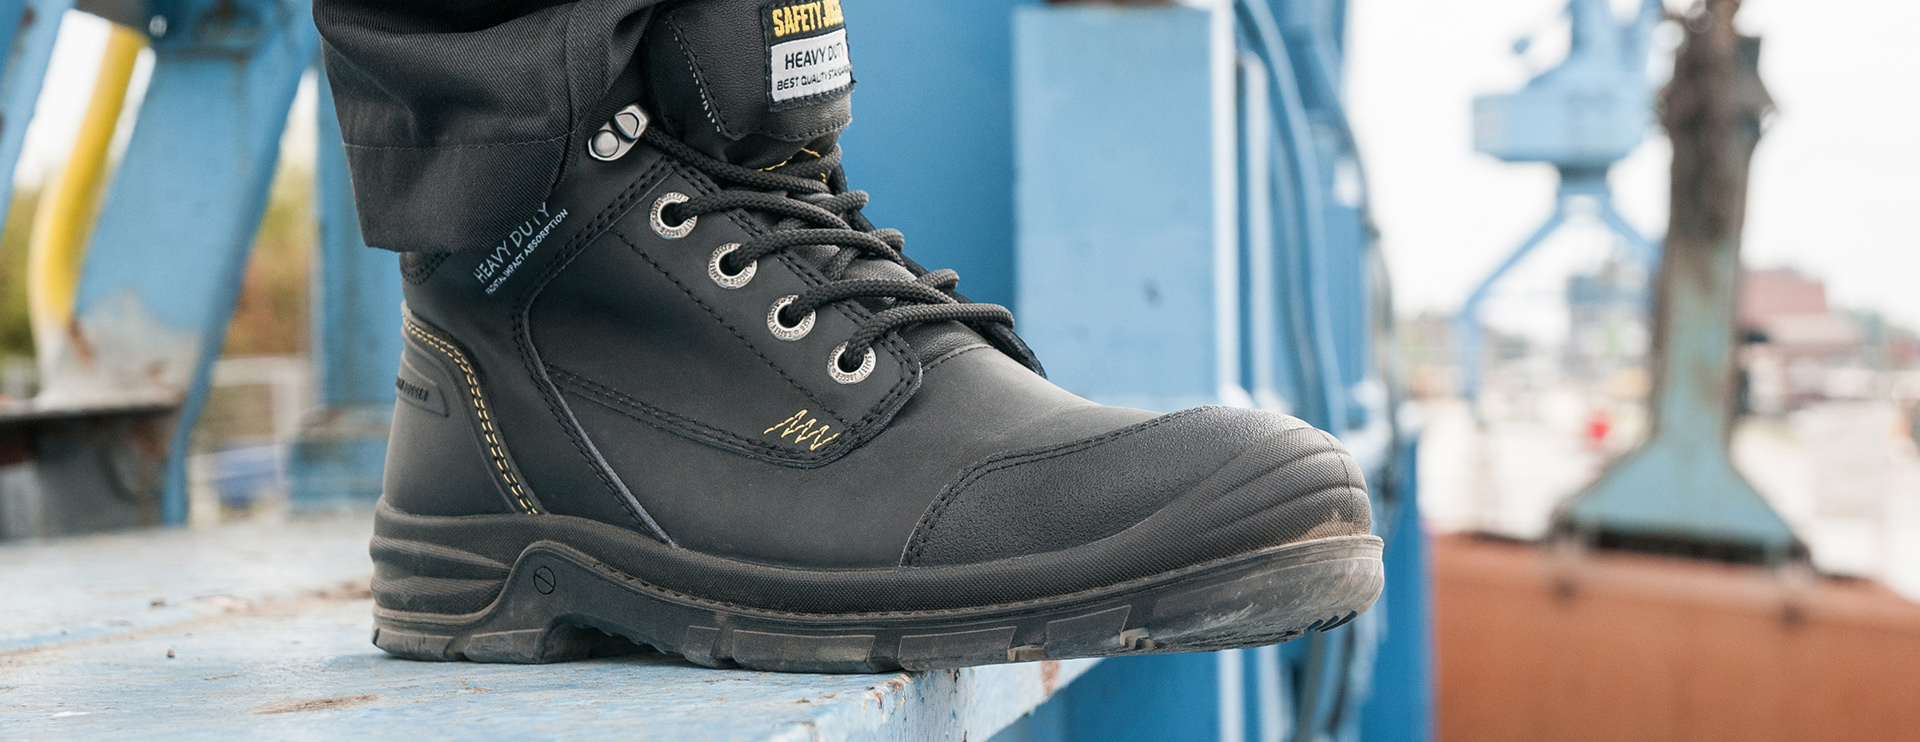 Construction boots | Safety Jogger